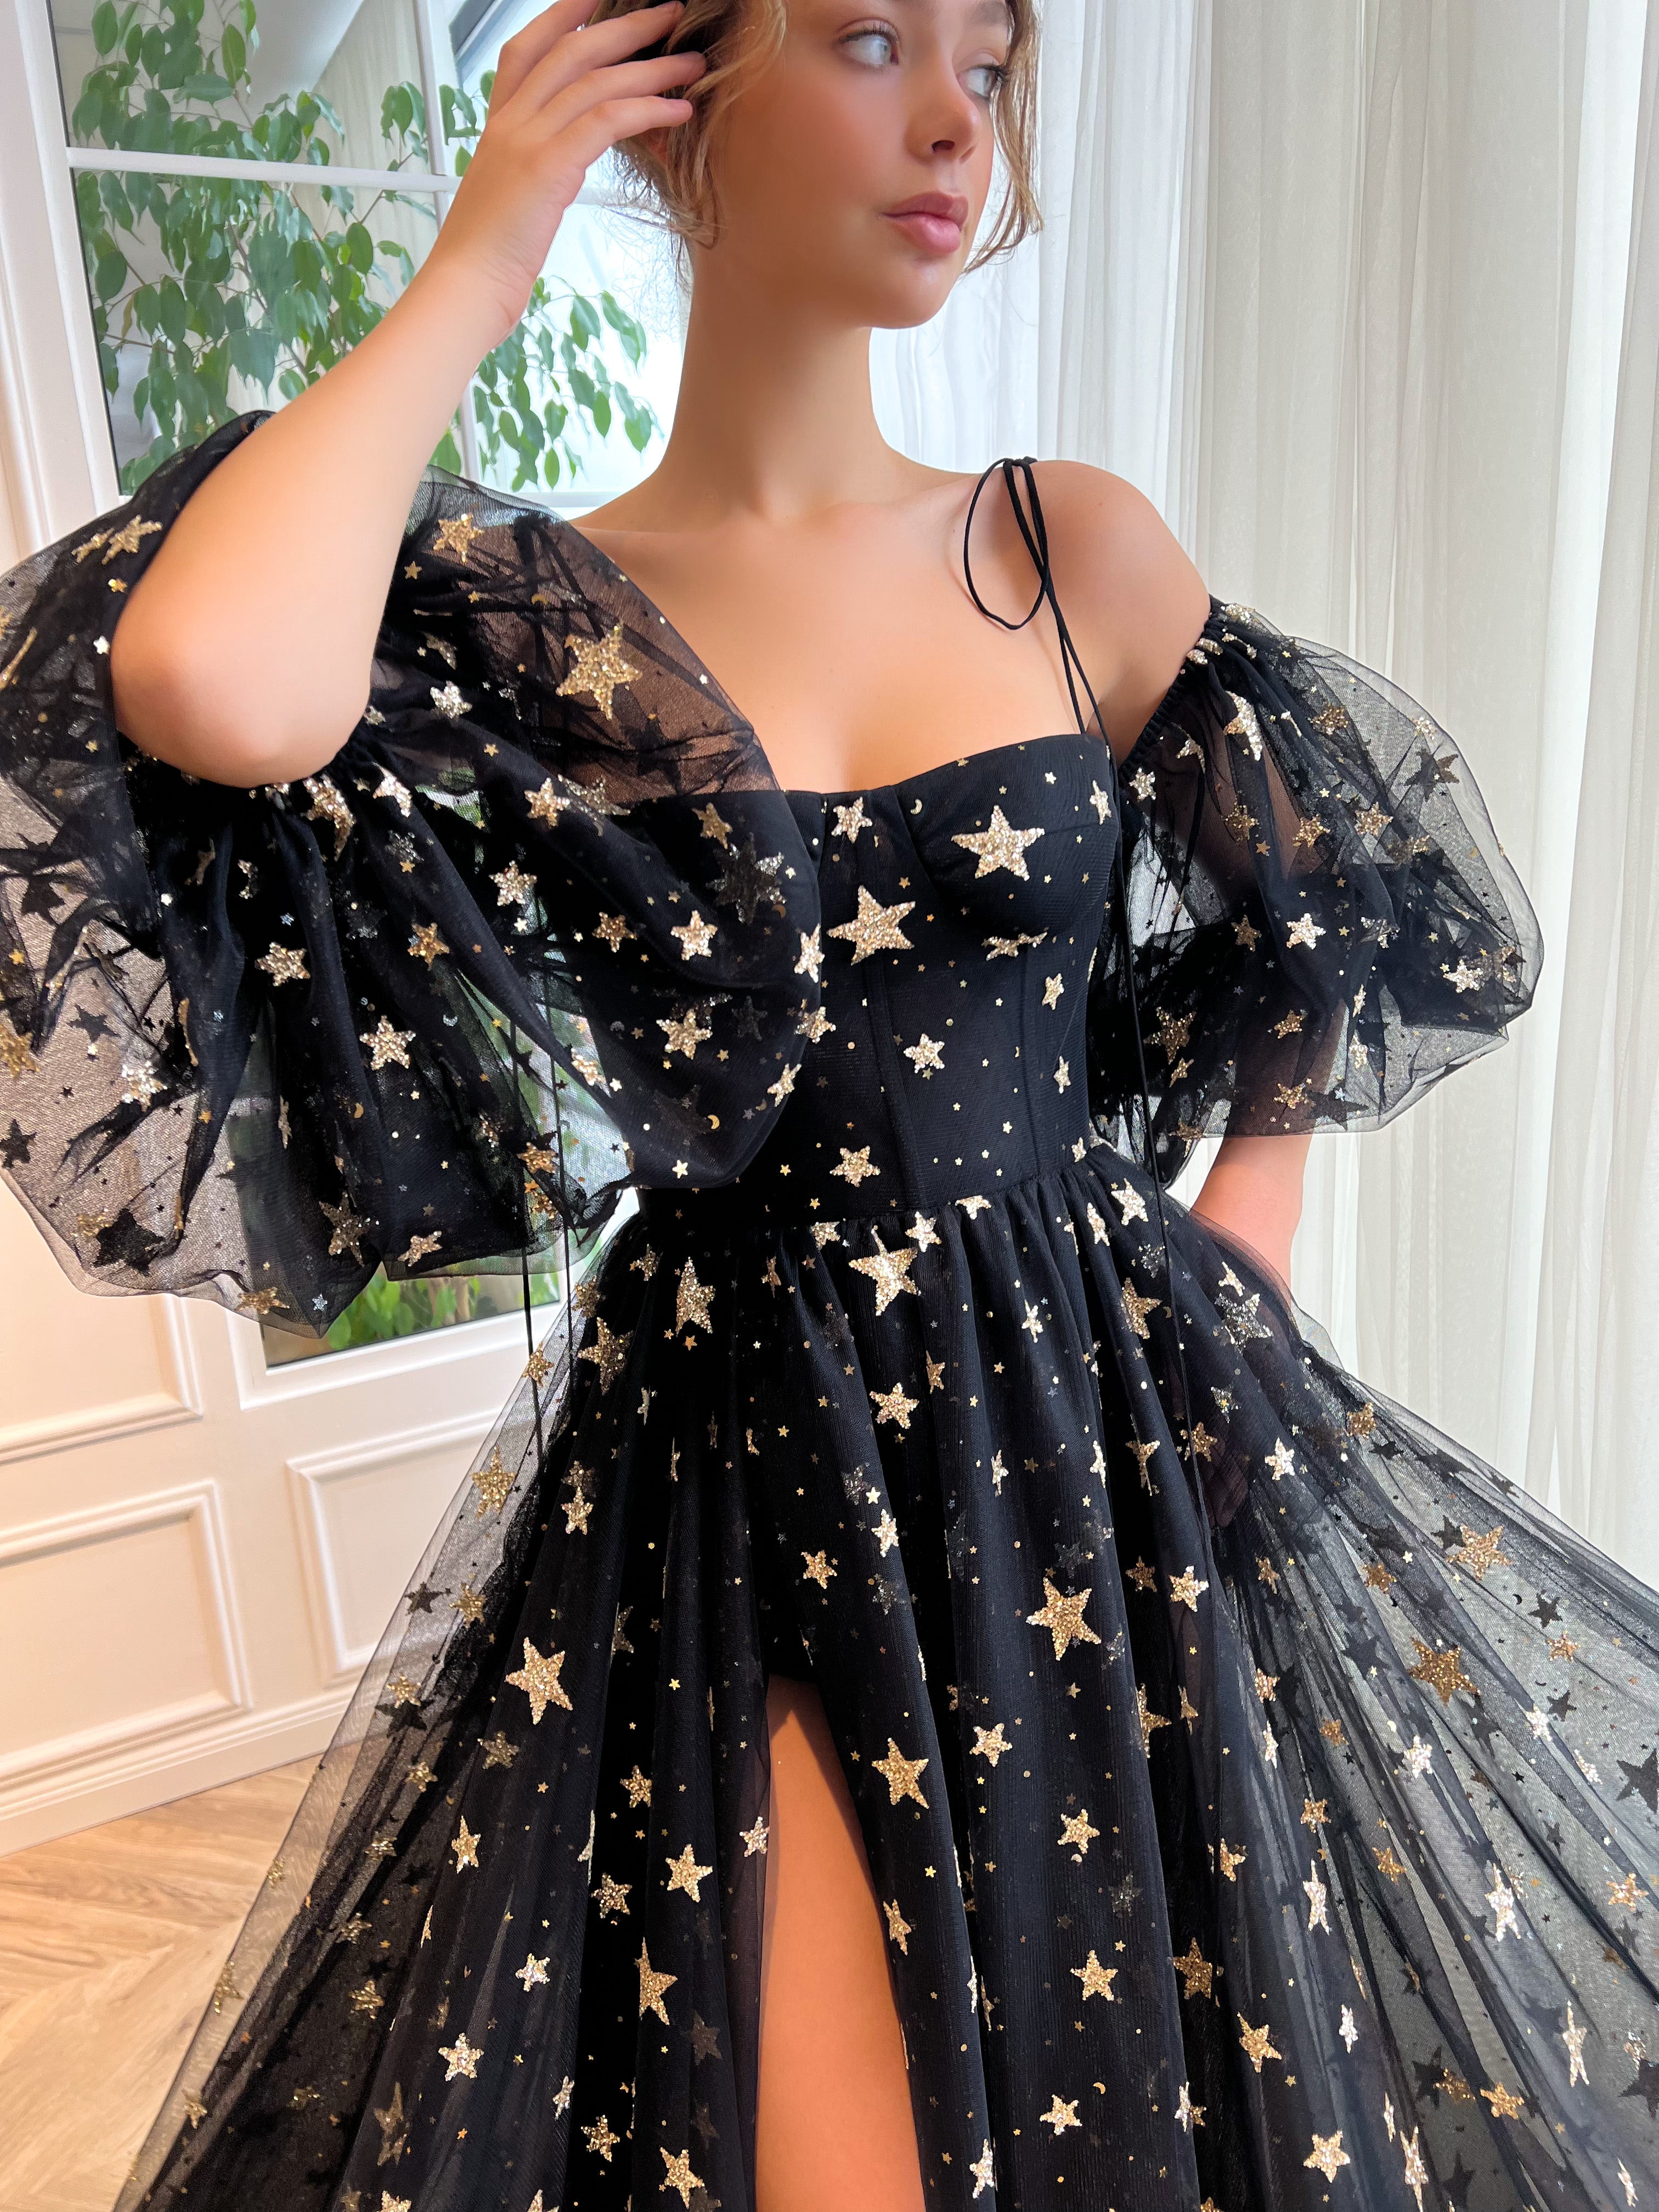 Black A-Line dress with spaghetti straps, off the shoulder sleeves and starry fabric